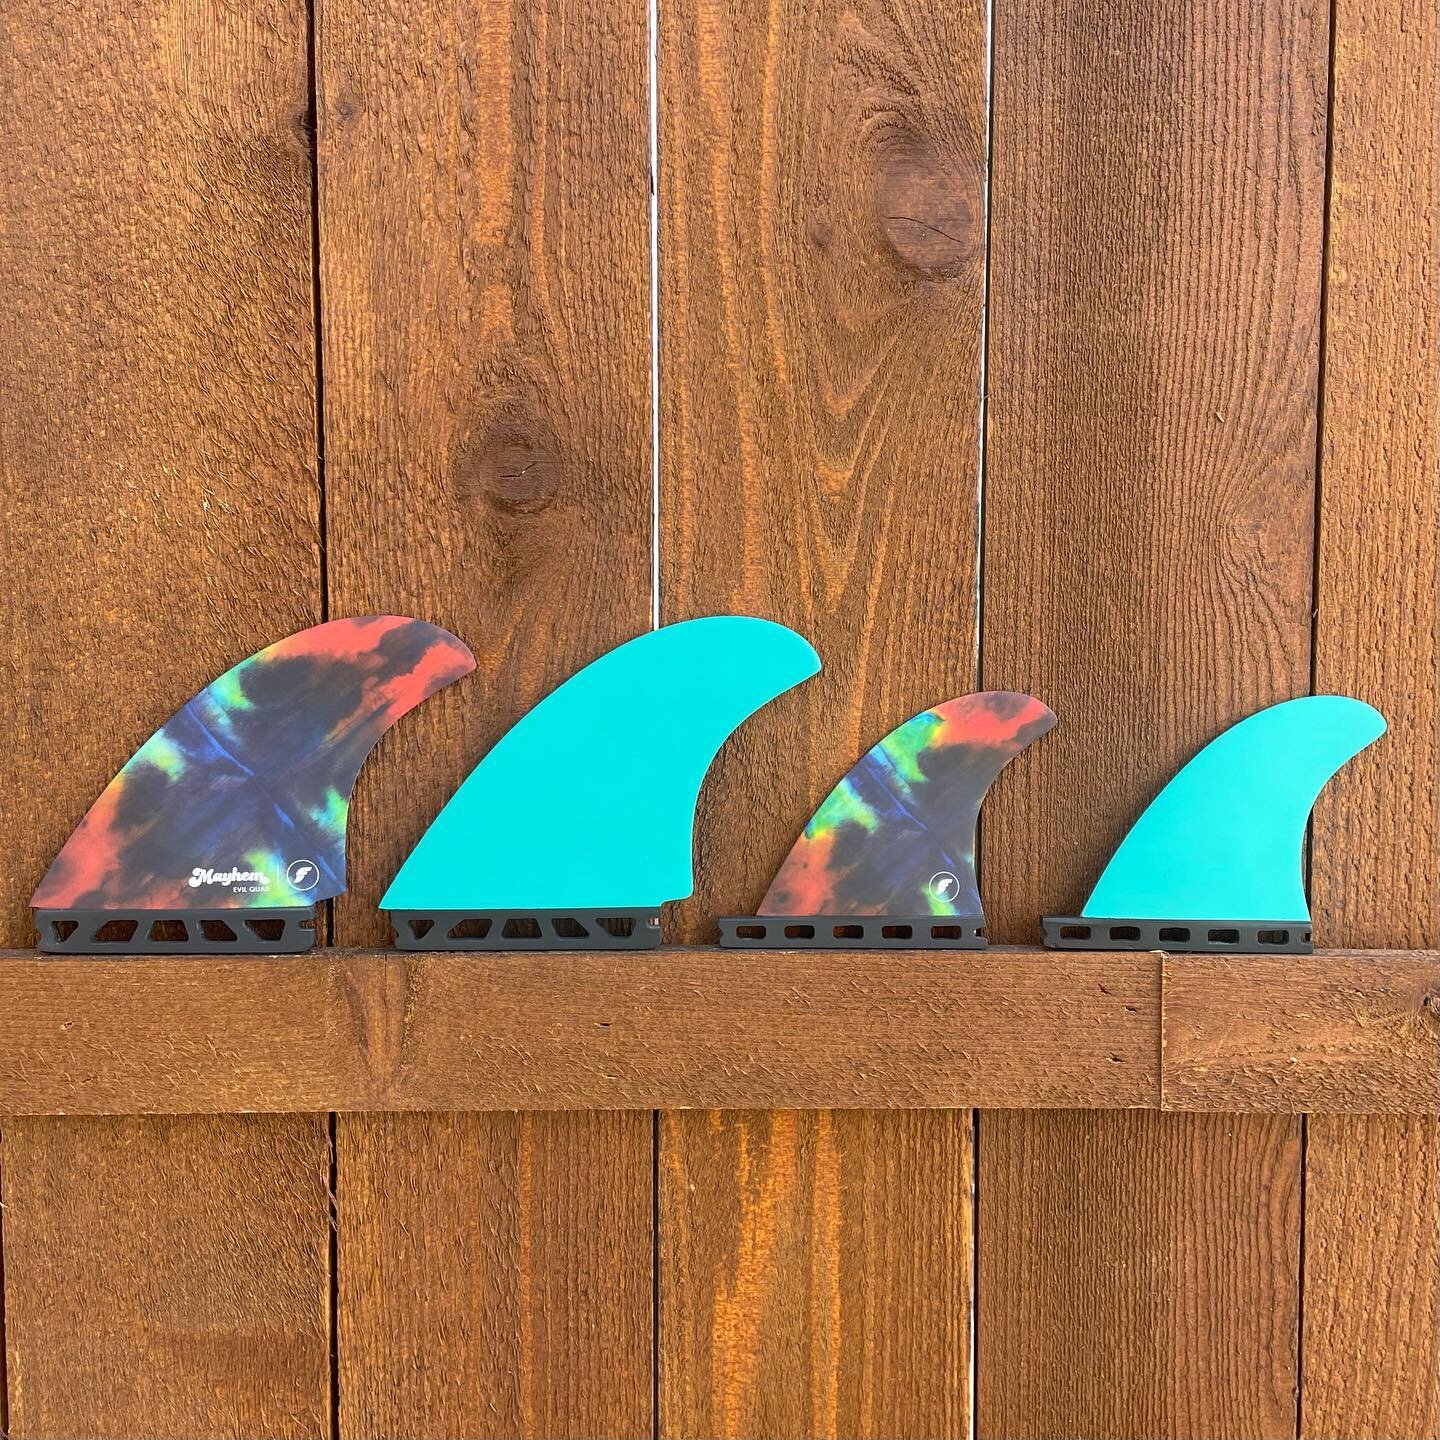 New Future fin shipment is out on the shelves! 😈🧜🏼&zwj;♂️💫

-Mayhem evil quad 
-Blackstix twin +1
-Mayhem 5 fin 
-Legacy neutral quad
-Zach Flores 9.5
-Albacore 8.5

&hellip;and so much more in the shop from the Blackstix, Legacy, Honeycomb, and 